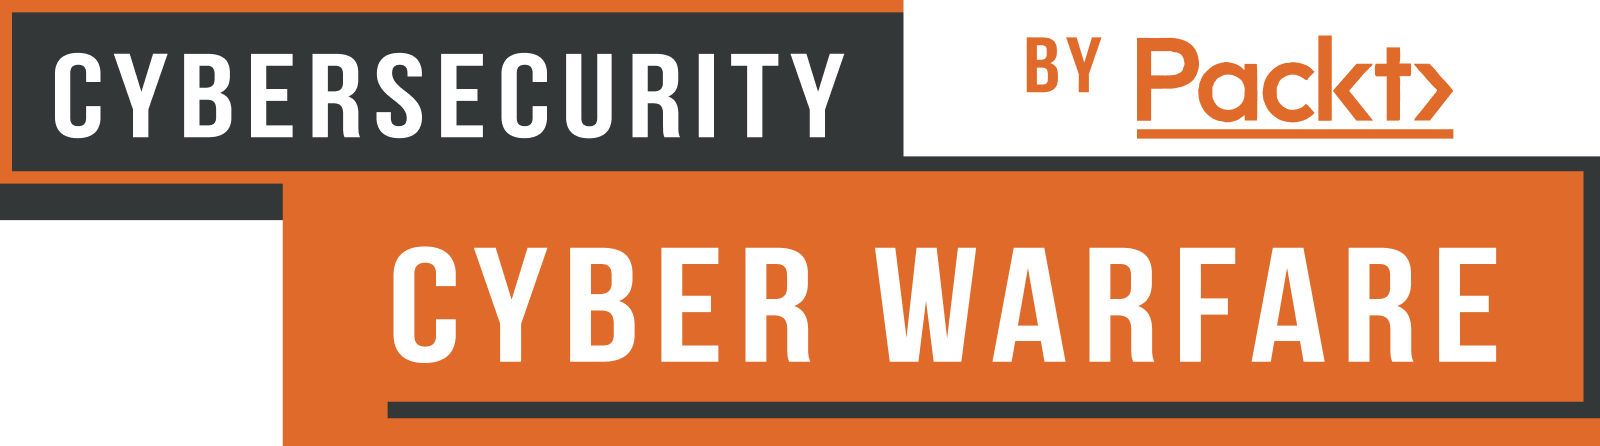 Humble Tech Book Bundle: Cybersecurity & Cyber Warfare by Packt